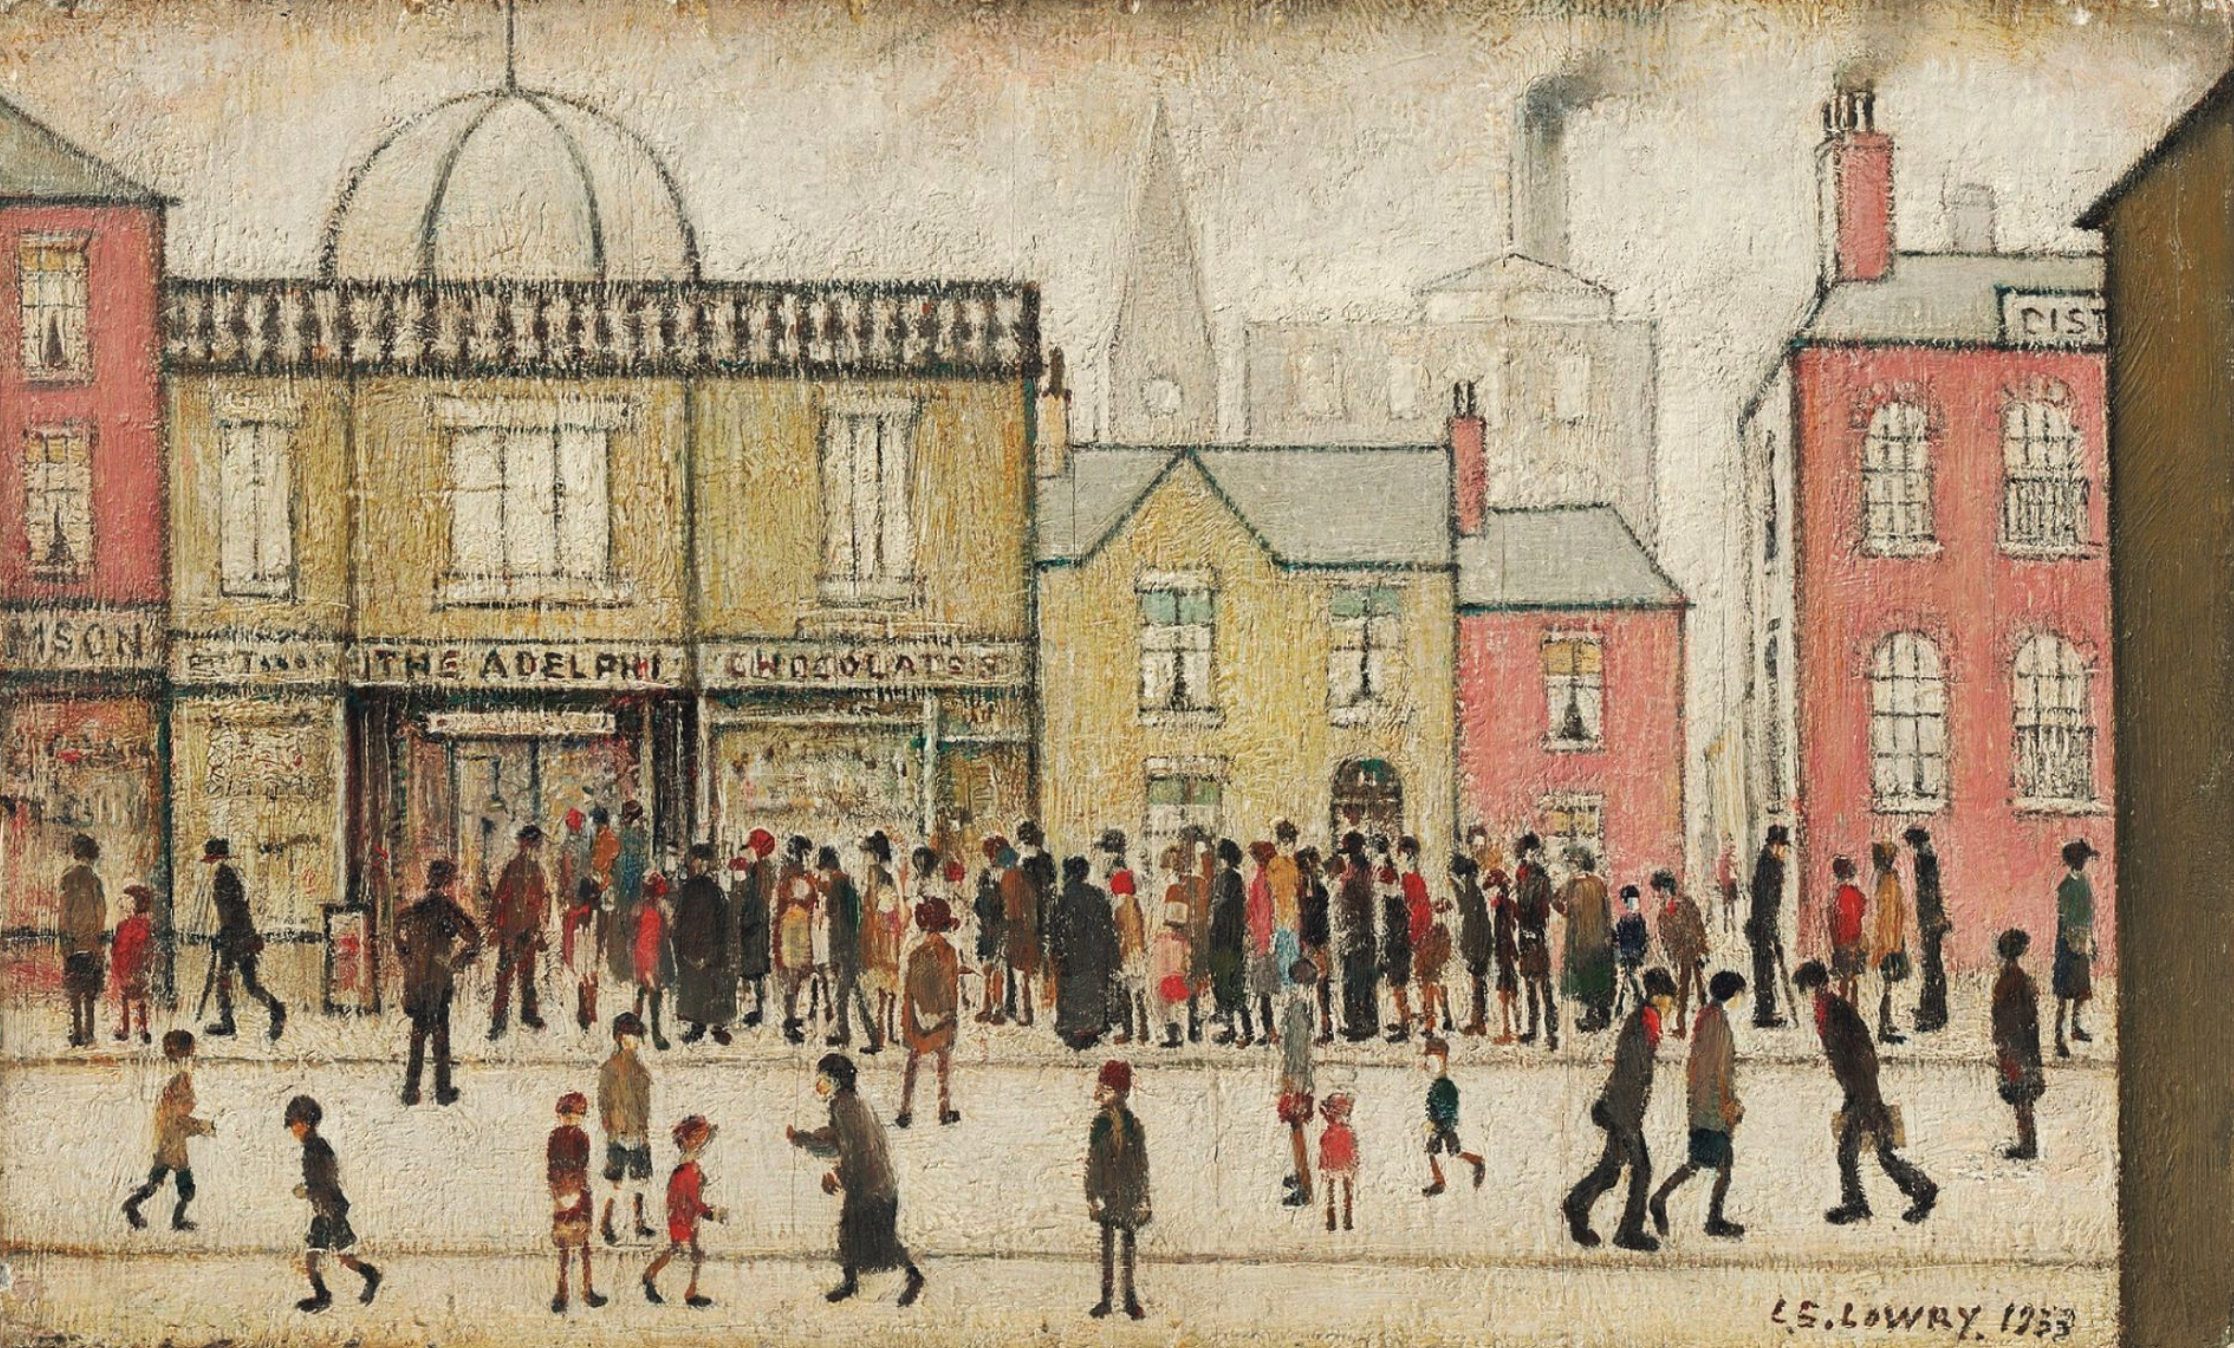 The Adelphi (Huddersfield, West Yorkshire) (1933) by Laurence Stephen Lowry (1887 - 1976), English artist.